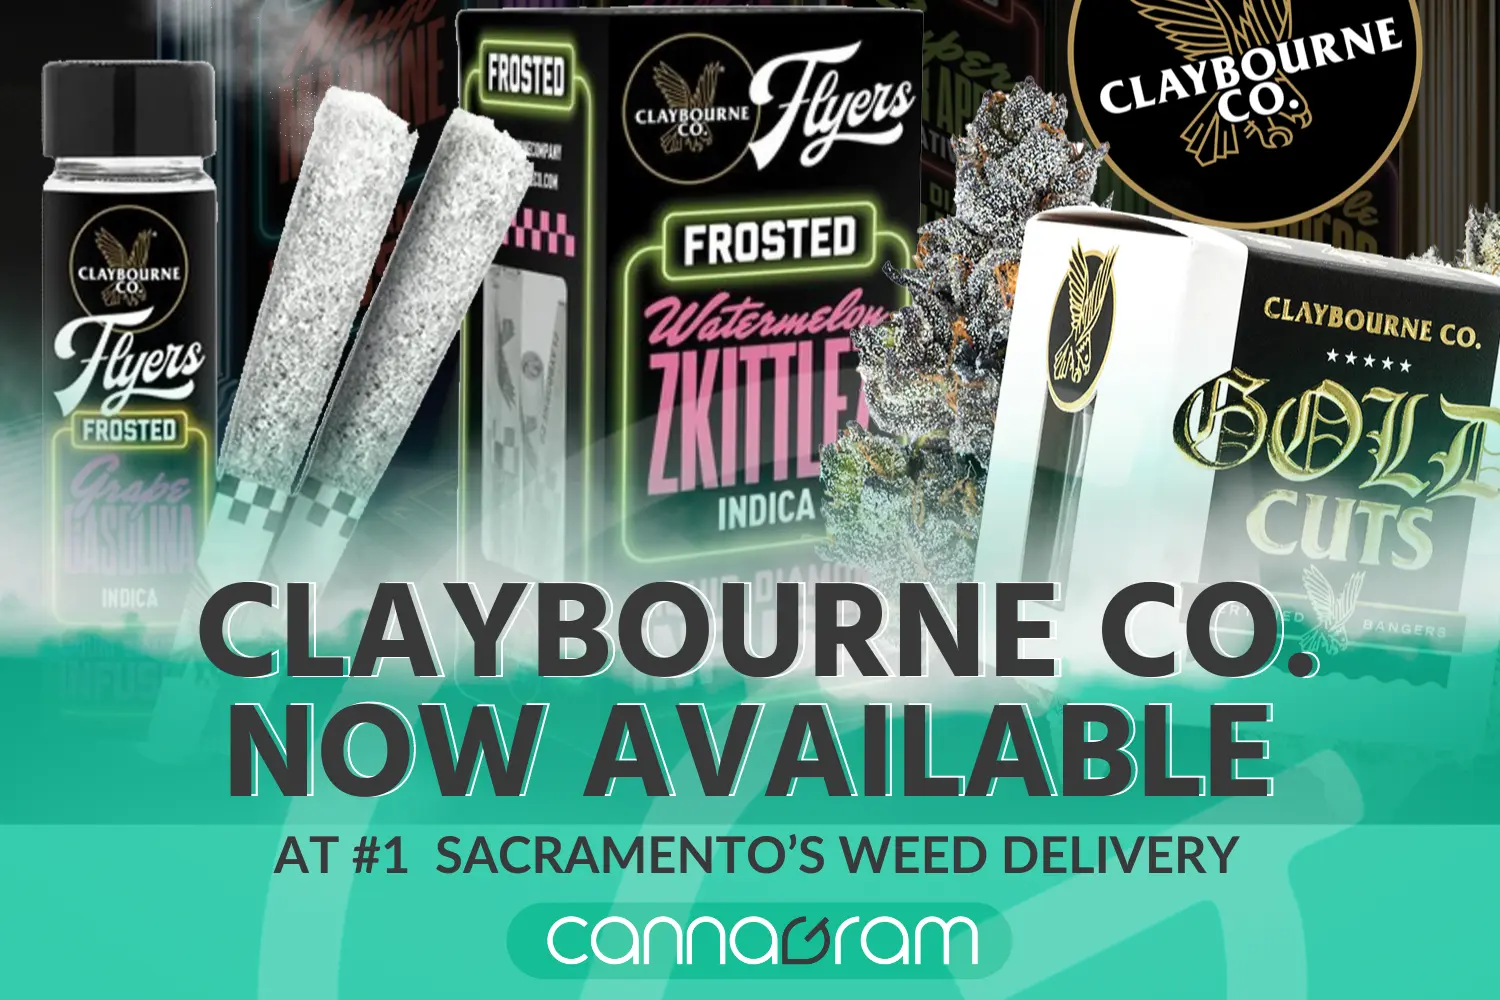 Claybourne Co. flower and preroll cannabis products ready for Sacramento weed delivery, featured on CANNAGRAM's blog